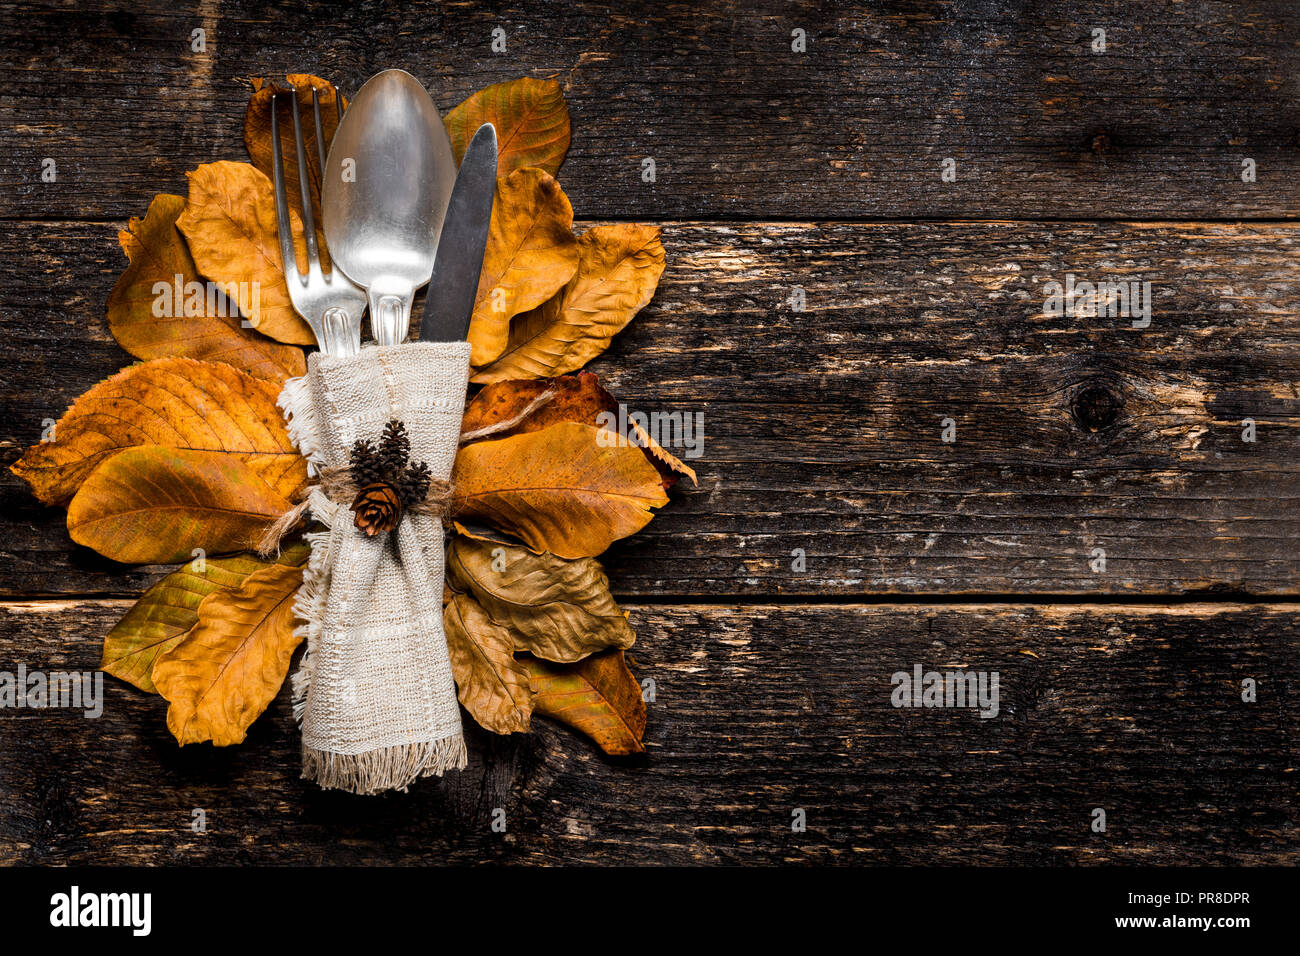 Thanksgiving Meal Setting. Seasonal table setting. Thanksgiving autumn place setting with cutlery and arrangement of colorful fall leaves. Stock Photo